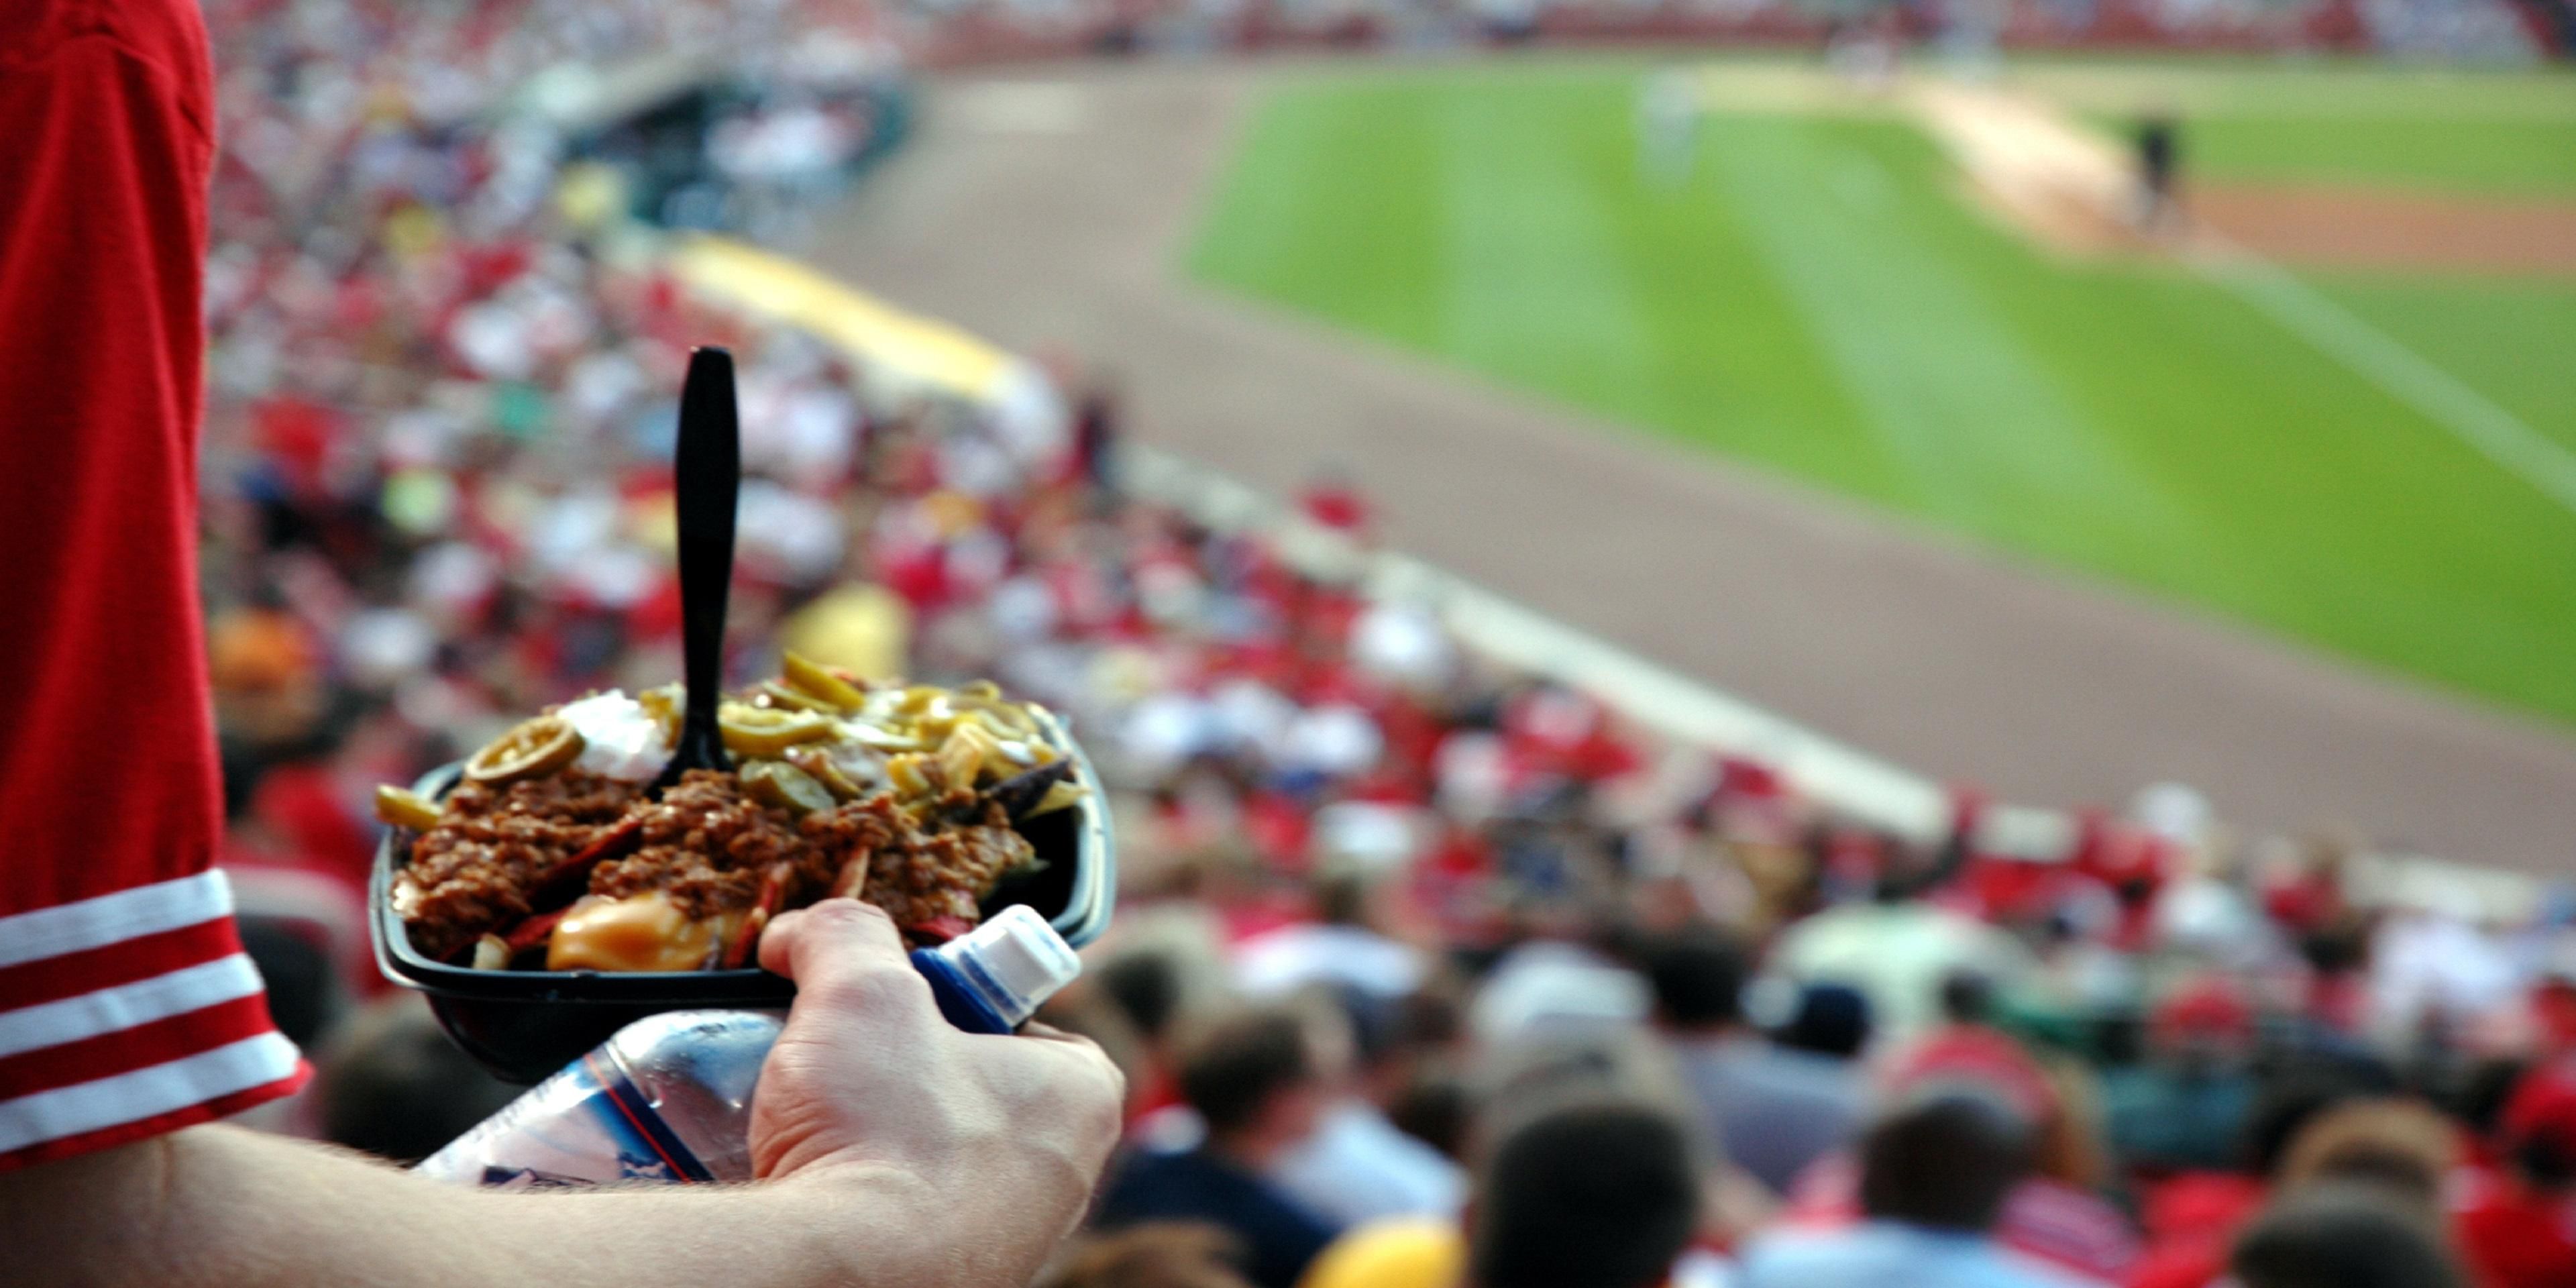 Experience all the sports action of Philadelphia when you stay with us. The hotel is just 5 miles from the South Philadelphia Sports Complex, or a 10-minute SEPTA ride. See the Phillies of Major League Baseball at Citizens Bank Park; the NFL’s Eagles play at Lincoln Financial Field, and the 76ers at the Wells Fargo Center.